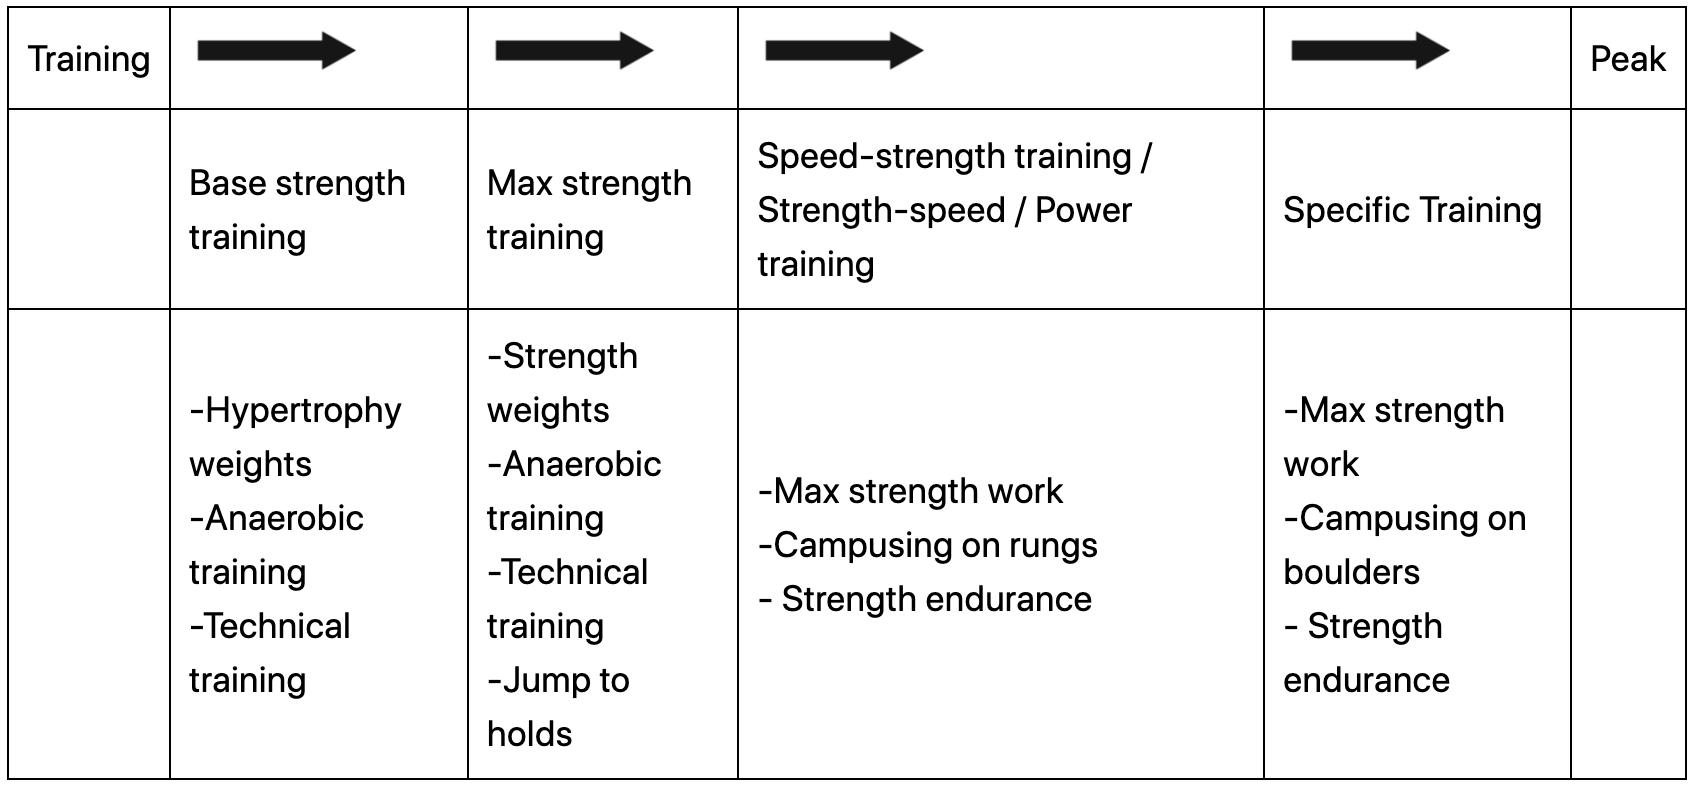 Timeline for Training Power before peak performance for a sport climber